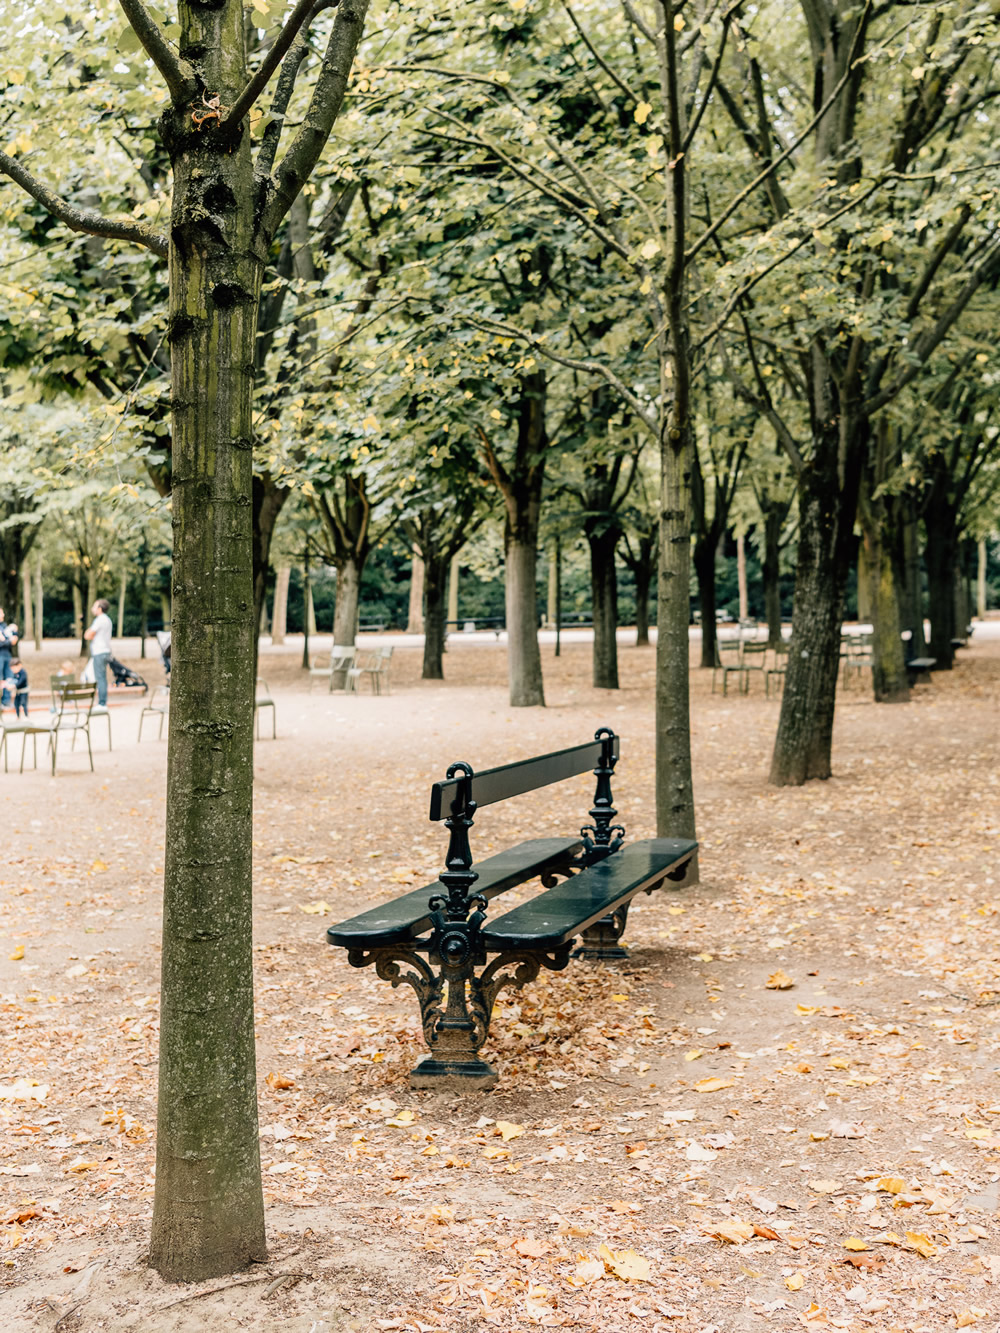 The famous Luxembourg Gardens in Paris